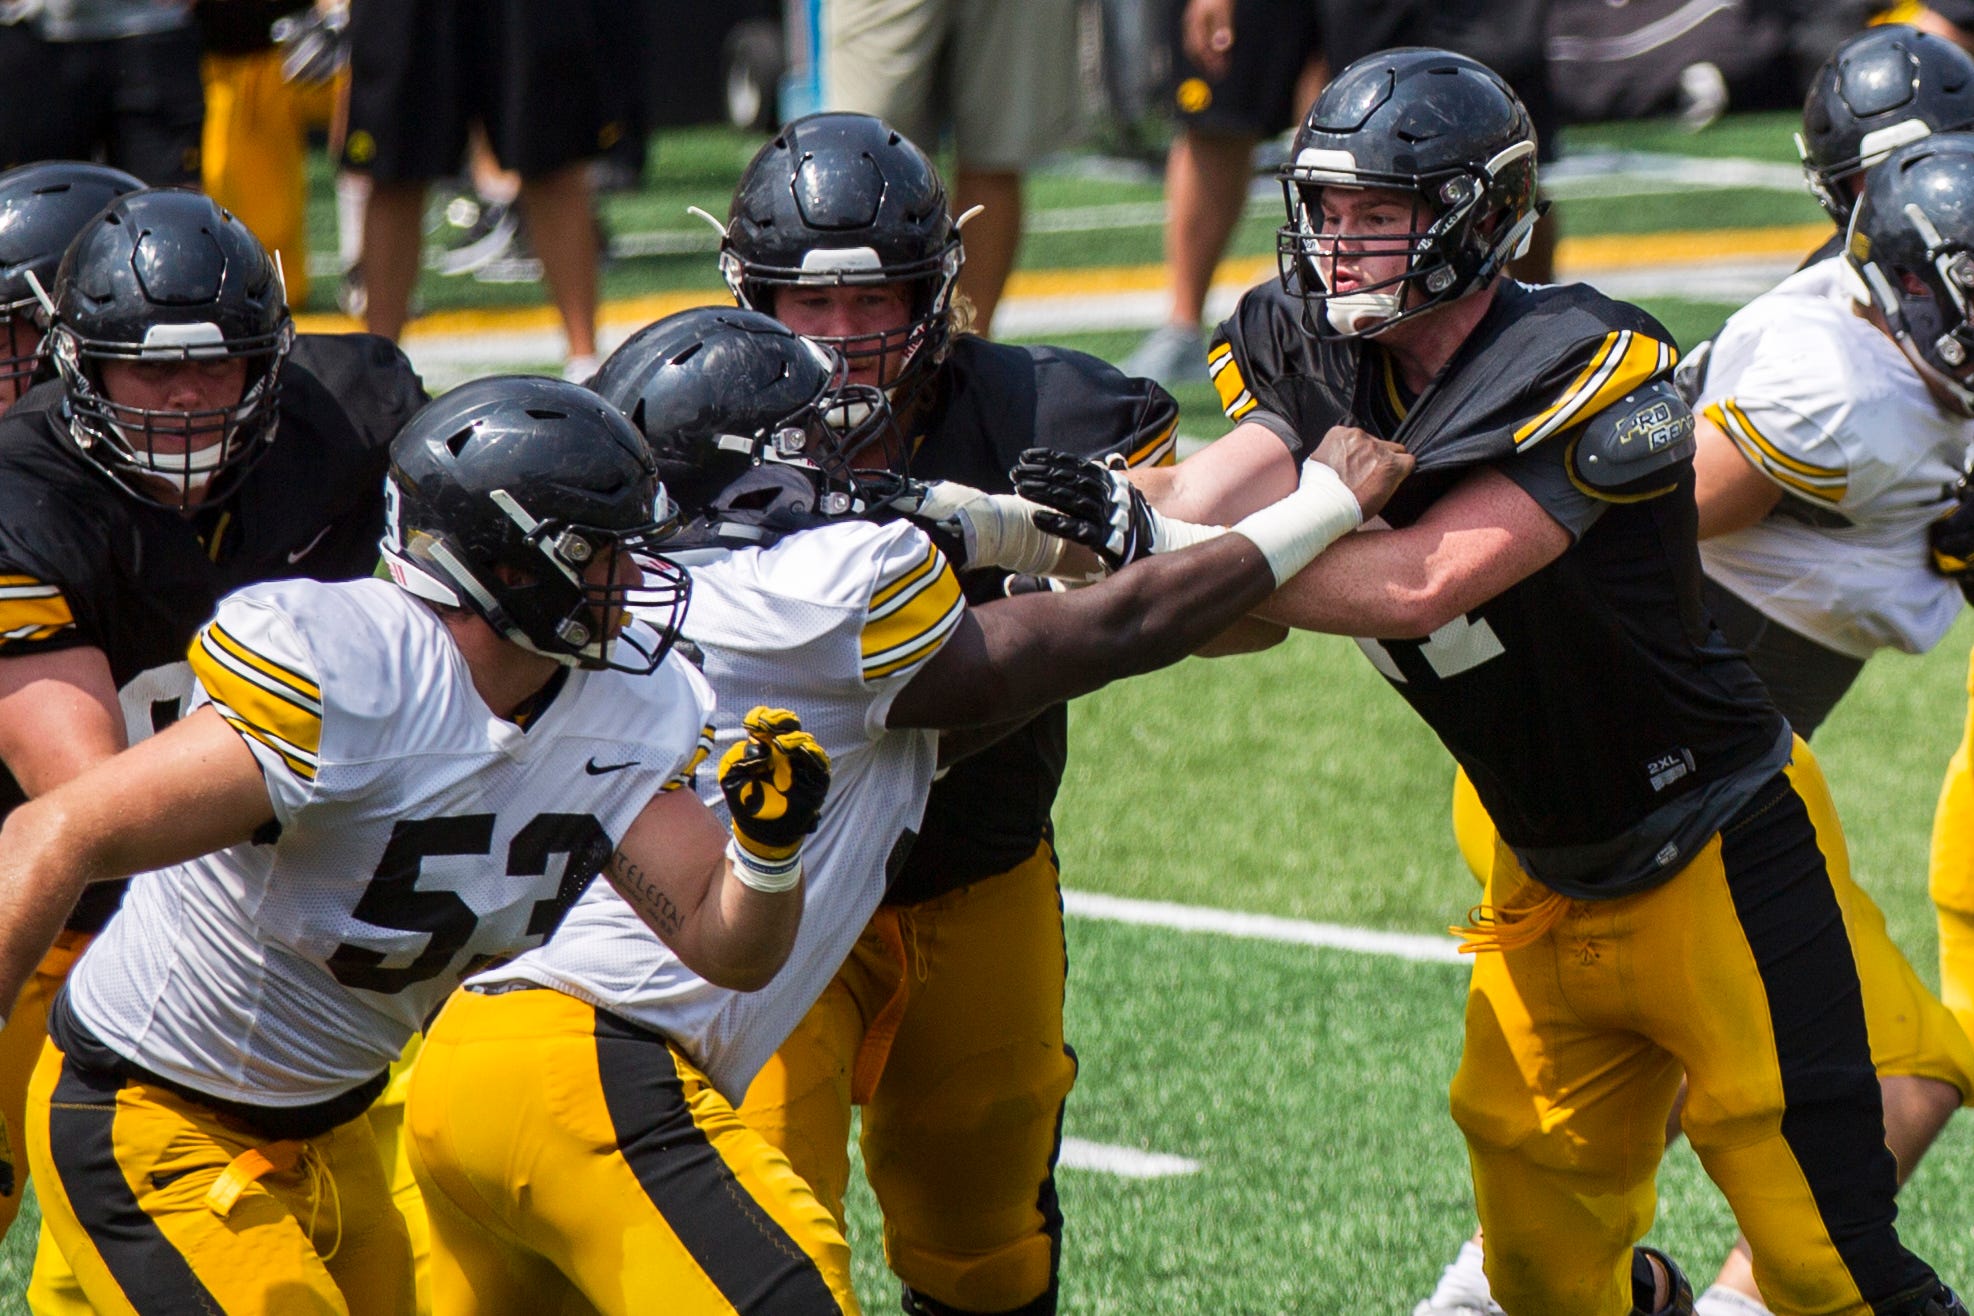 Iowa offensive lineman Mark Kallenberger (71) runs through a drill during a Kids Day practice on Saturday, Aug. 11, 2018, at Kinnick Stadium in Iowa City.